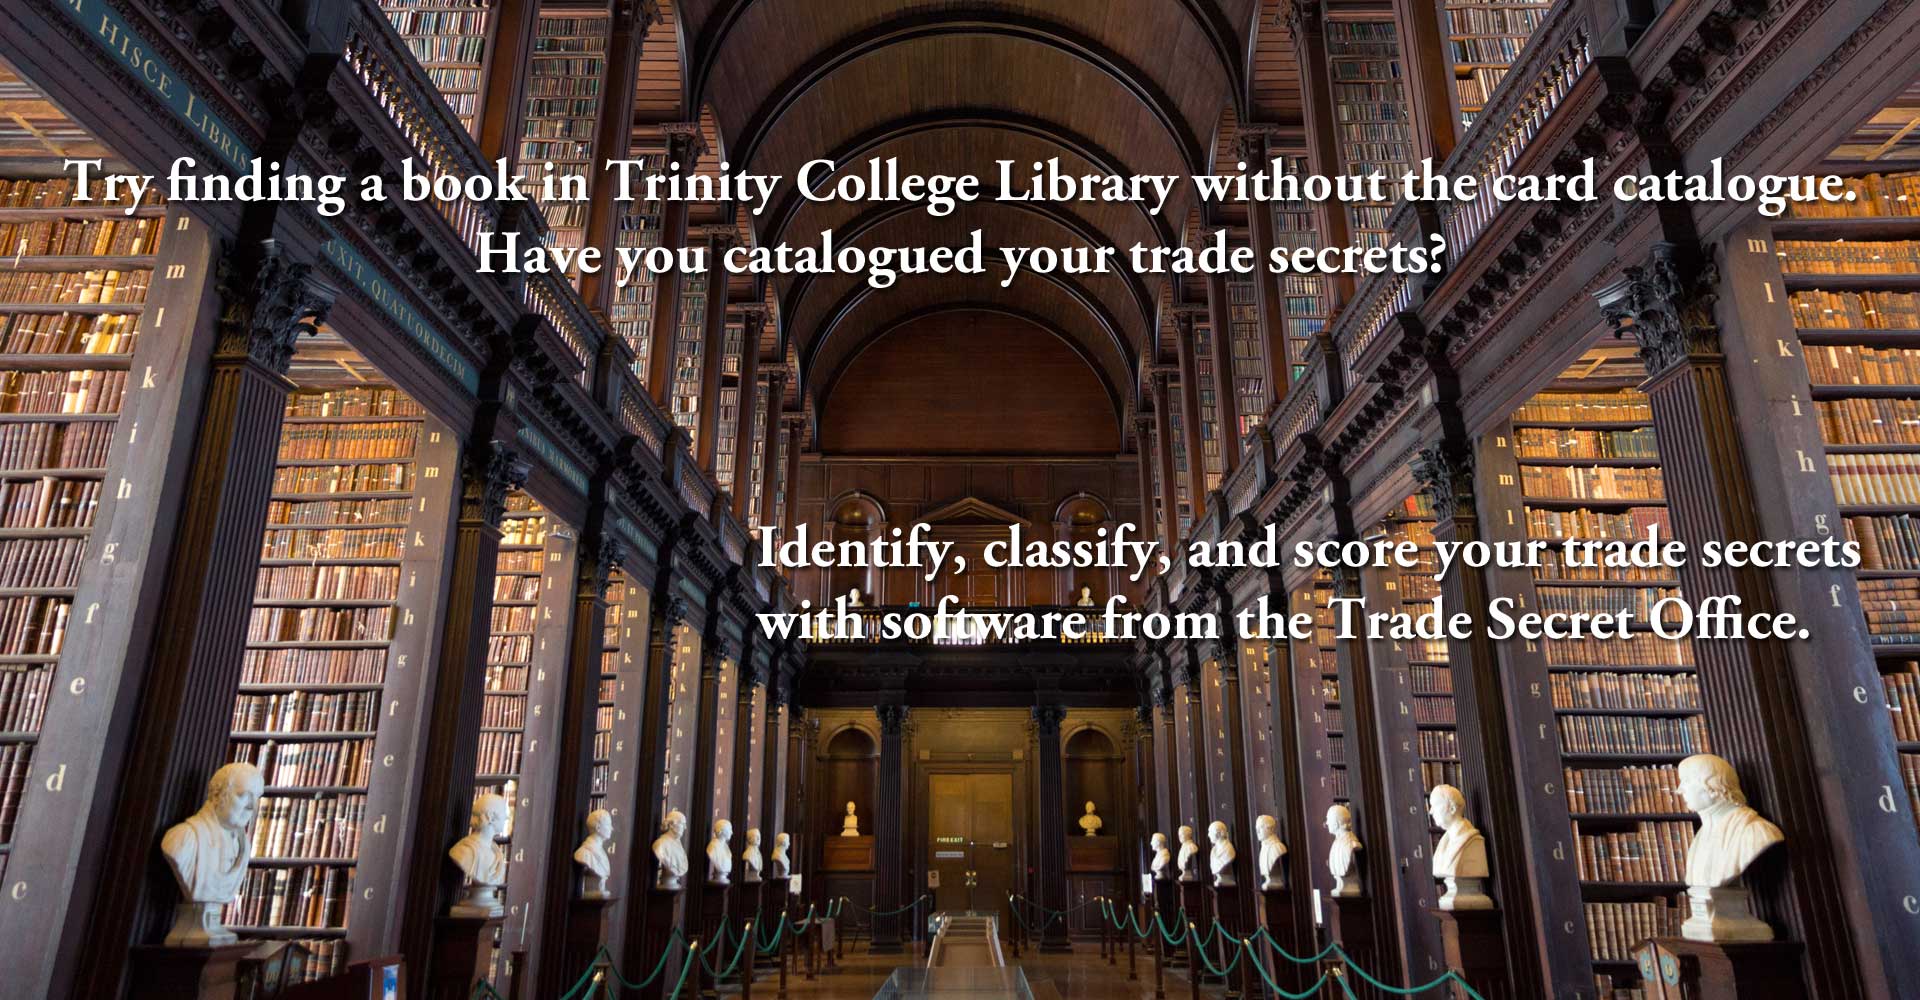 Try finding a book in Trinity College Library without the card catalogue. Have you catalogued your trade secrets?